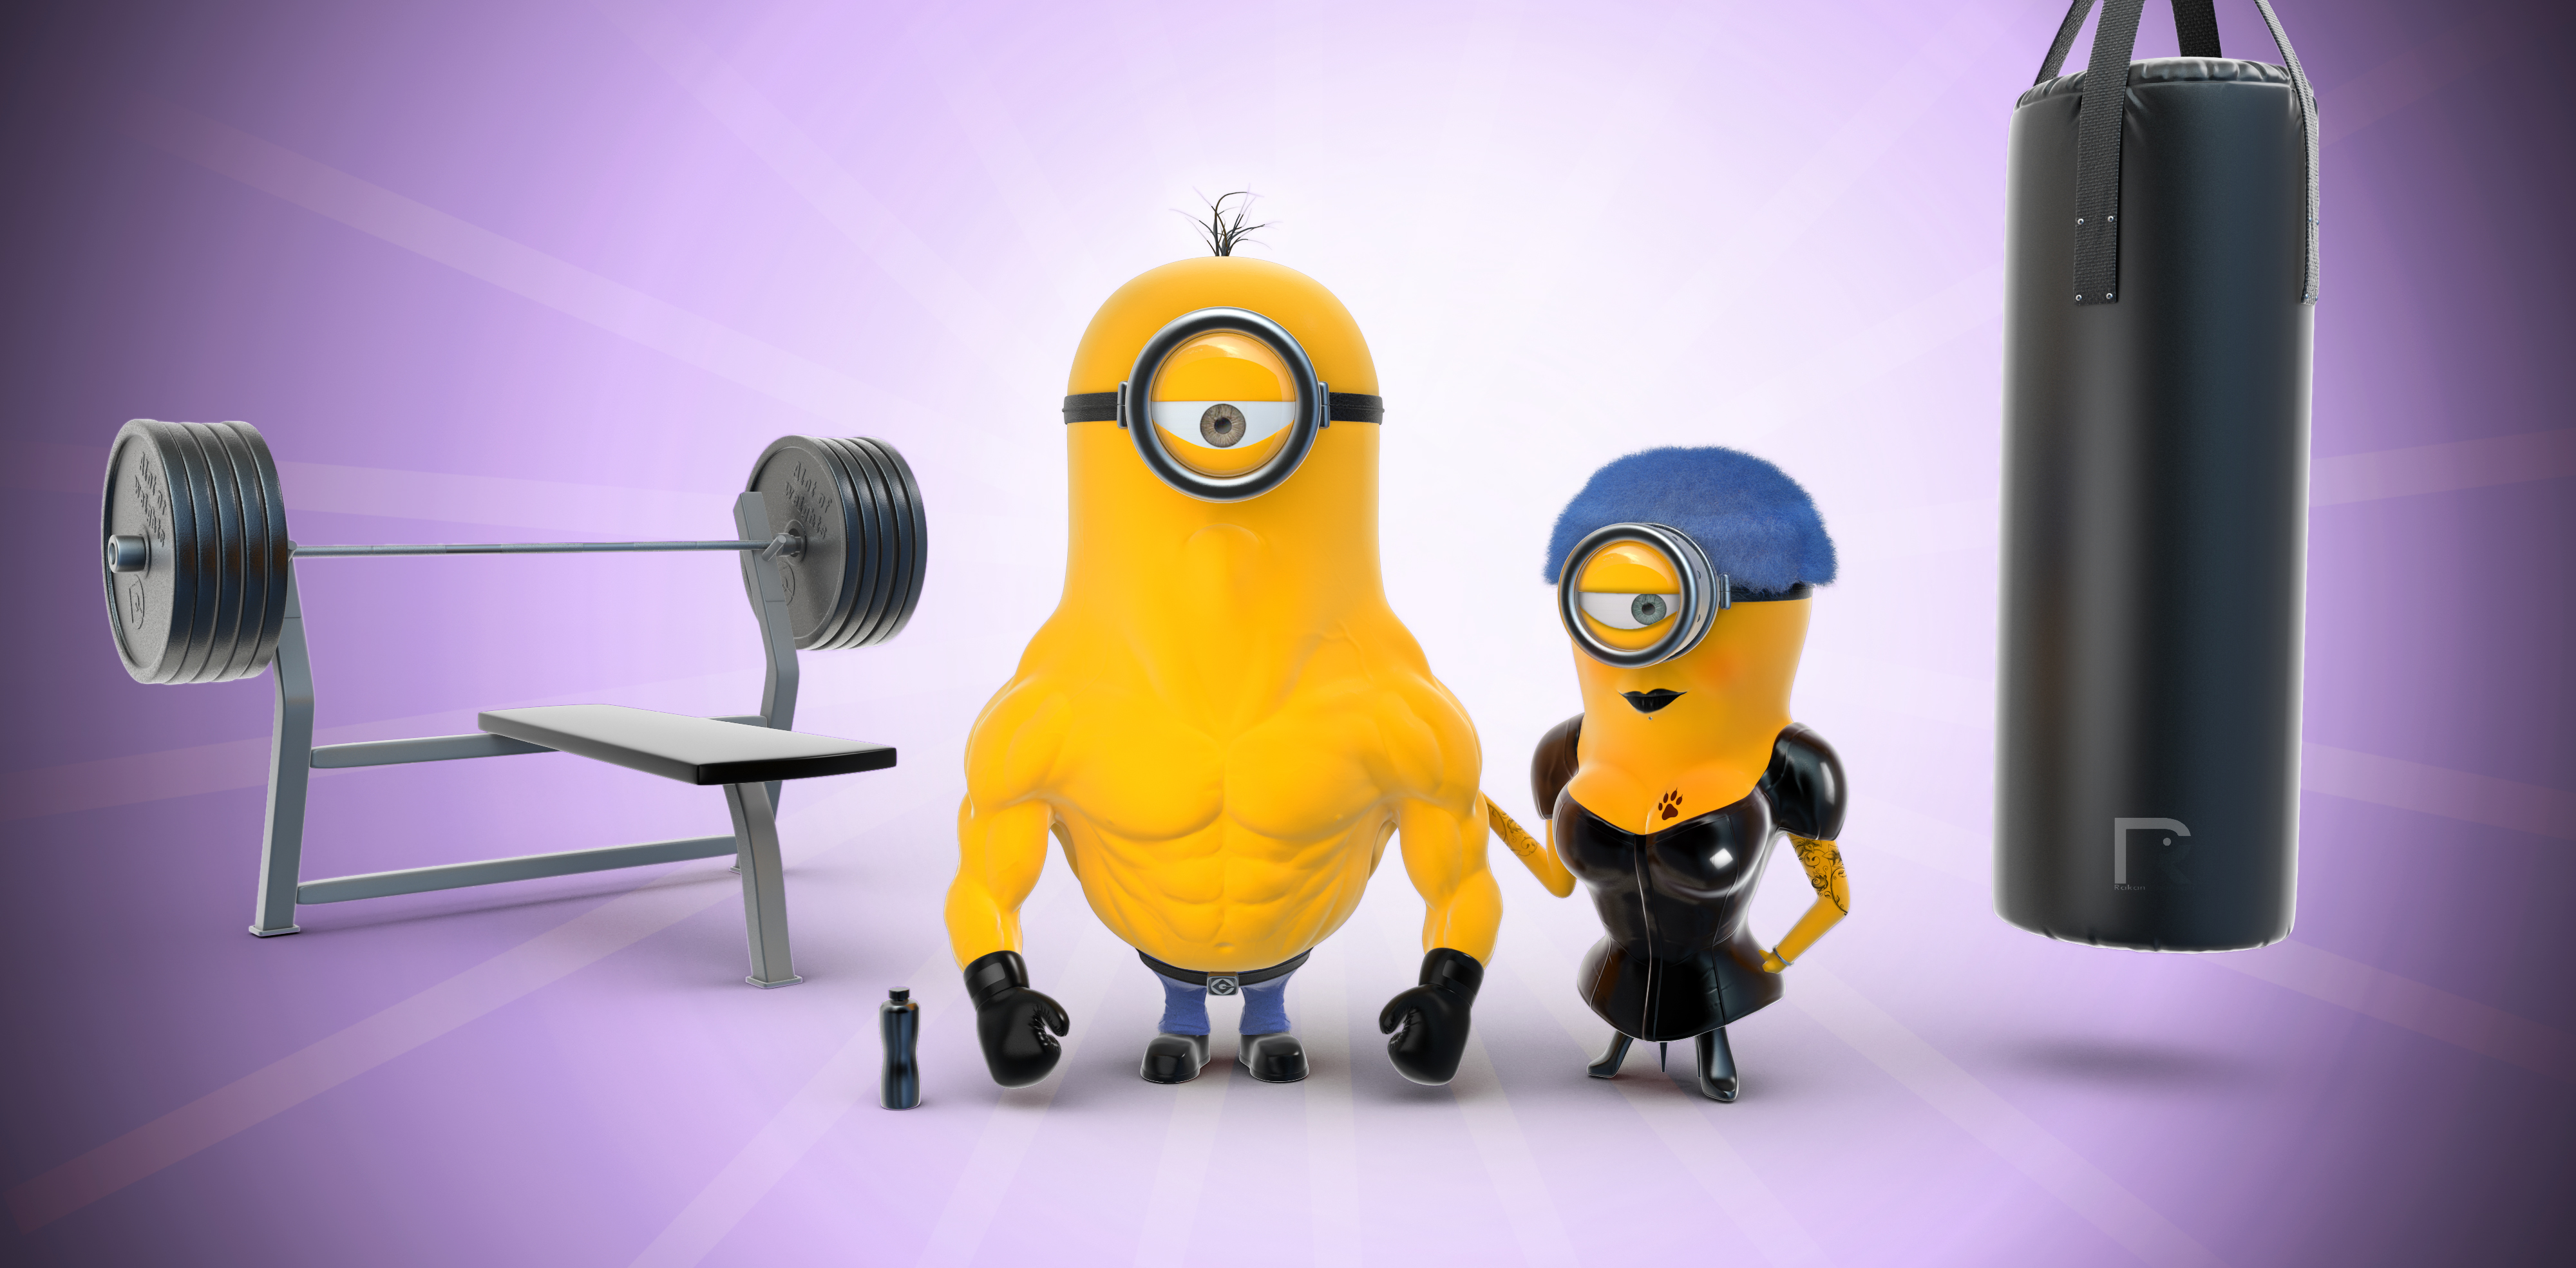 Minions Hd Wallpapers For Mobile Free Download - brownbeast